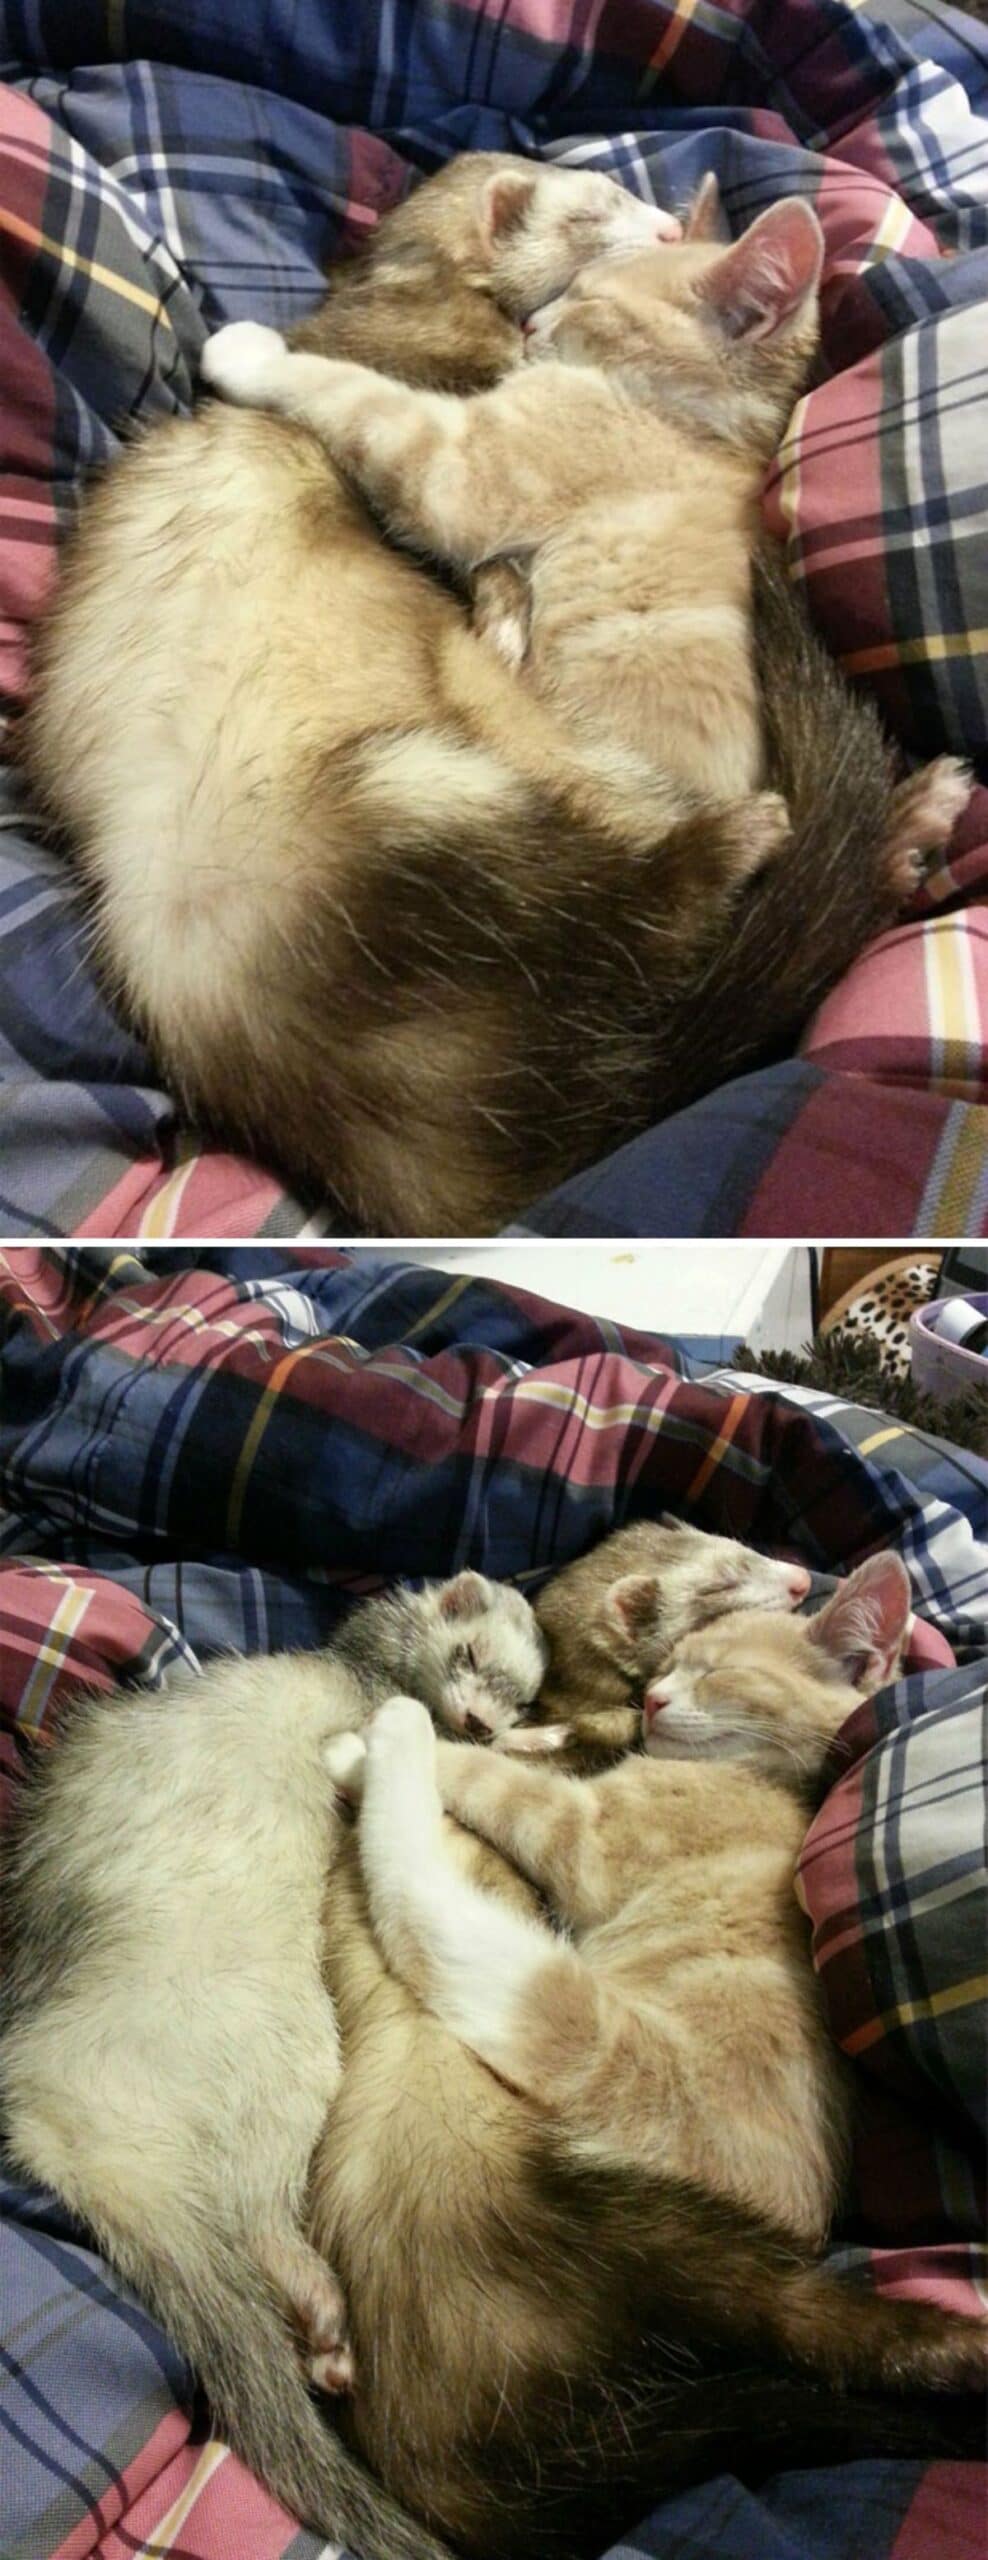 1 photo of brown and black ferret cuddling and sleeping with orange kitten on a bed and 1 photo of 2 brown and black ferrets cuddling with the kitten